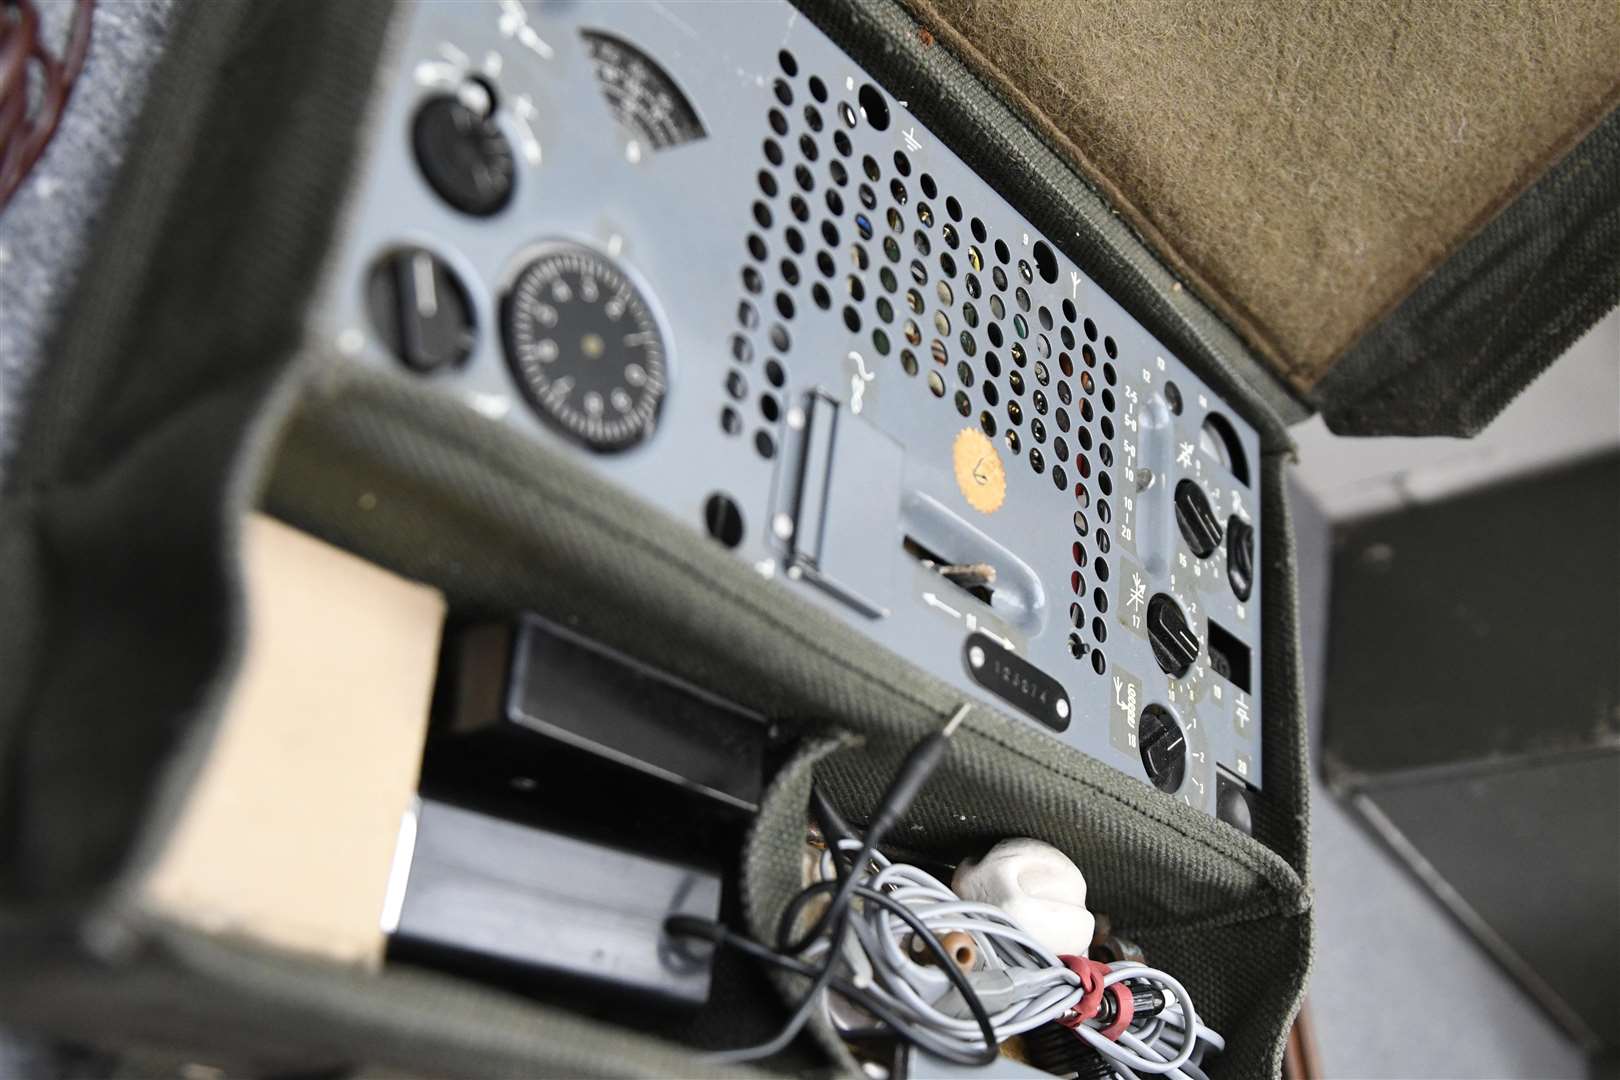 A transmitter from the Cold War period. Picture: Barry Goodwin